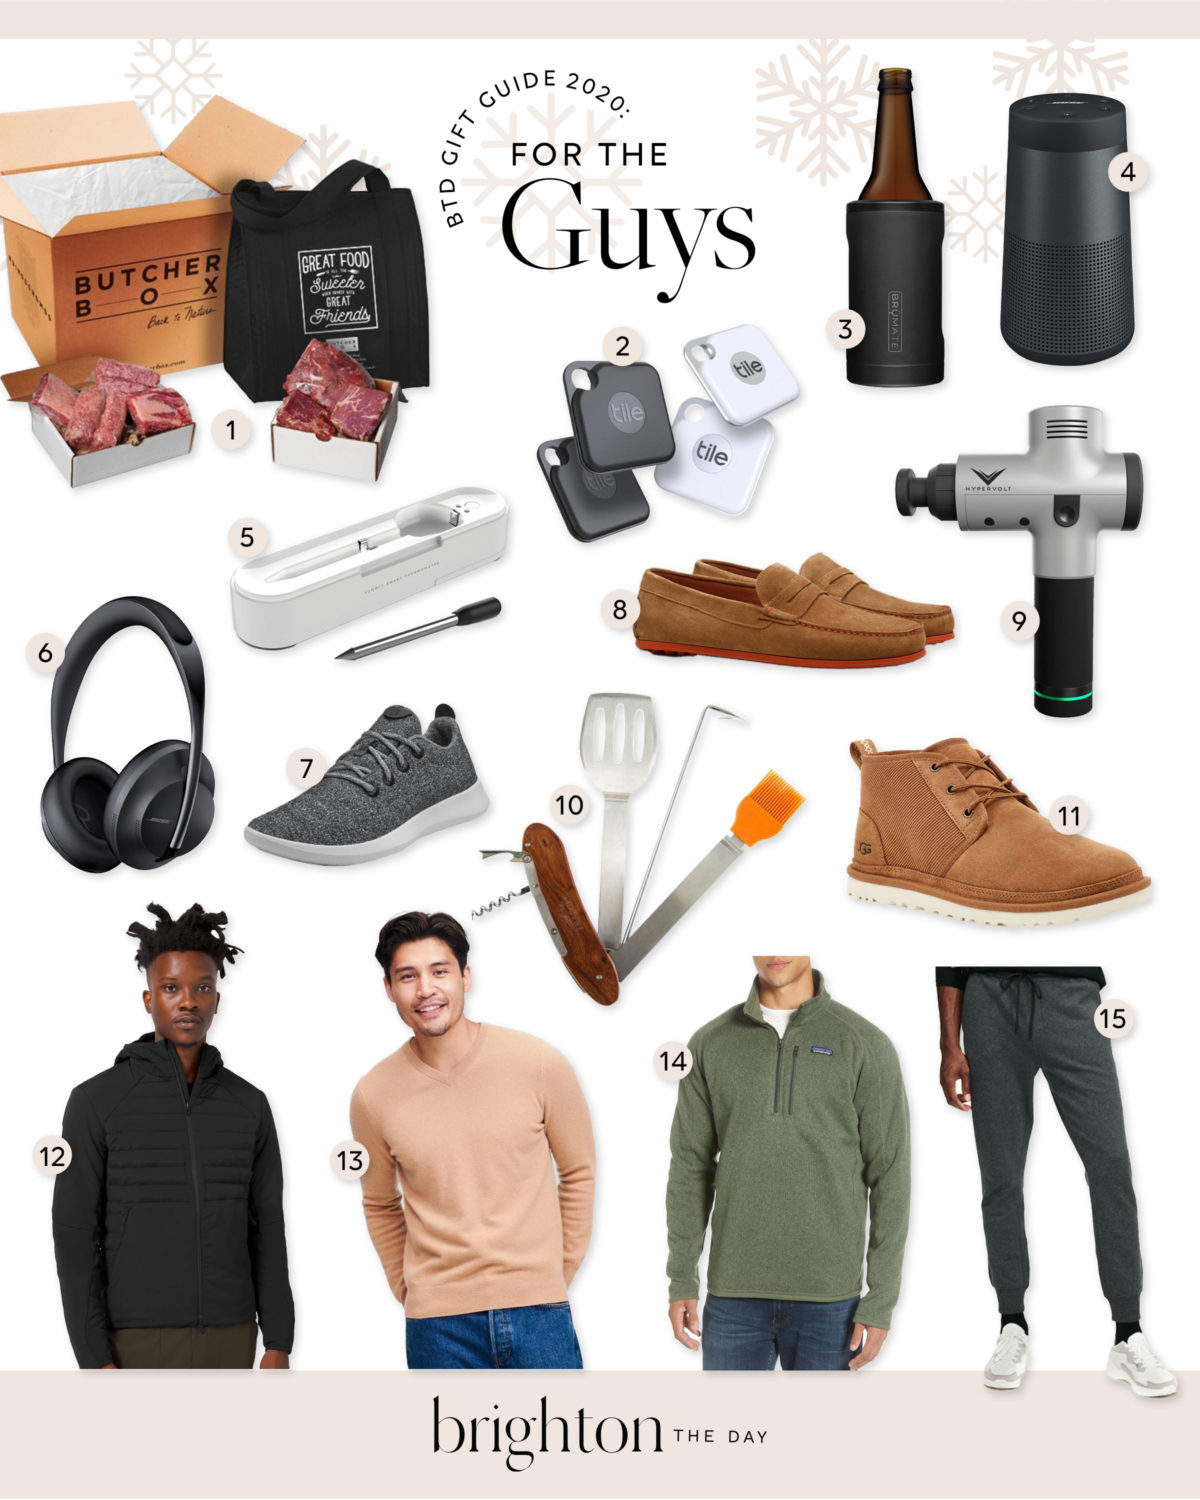 brightontheday gift guide for him 2020